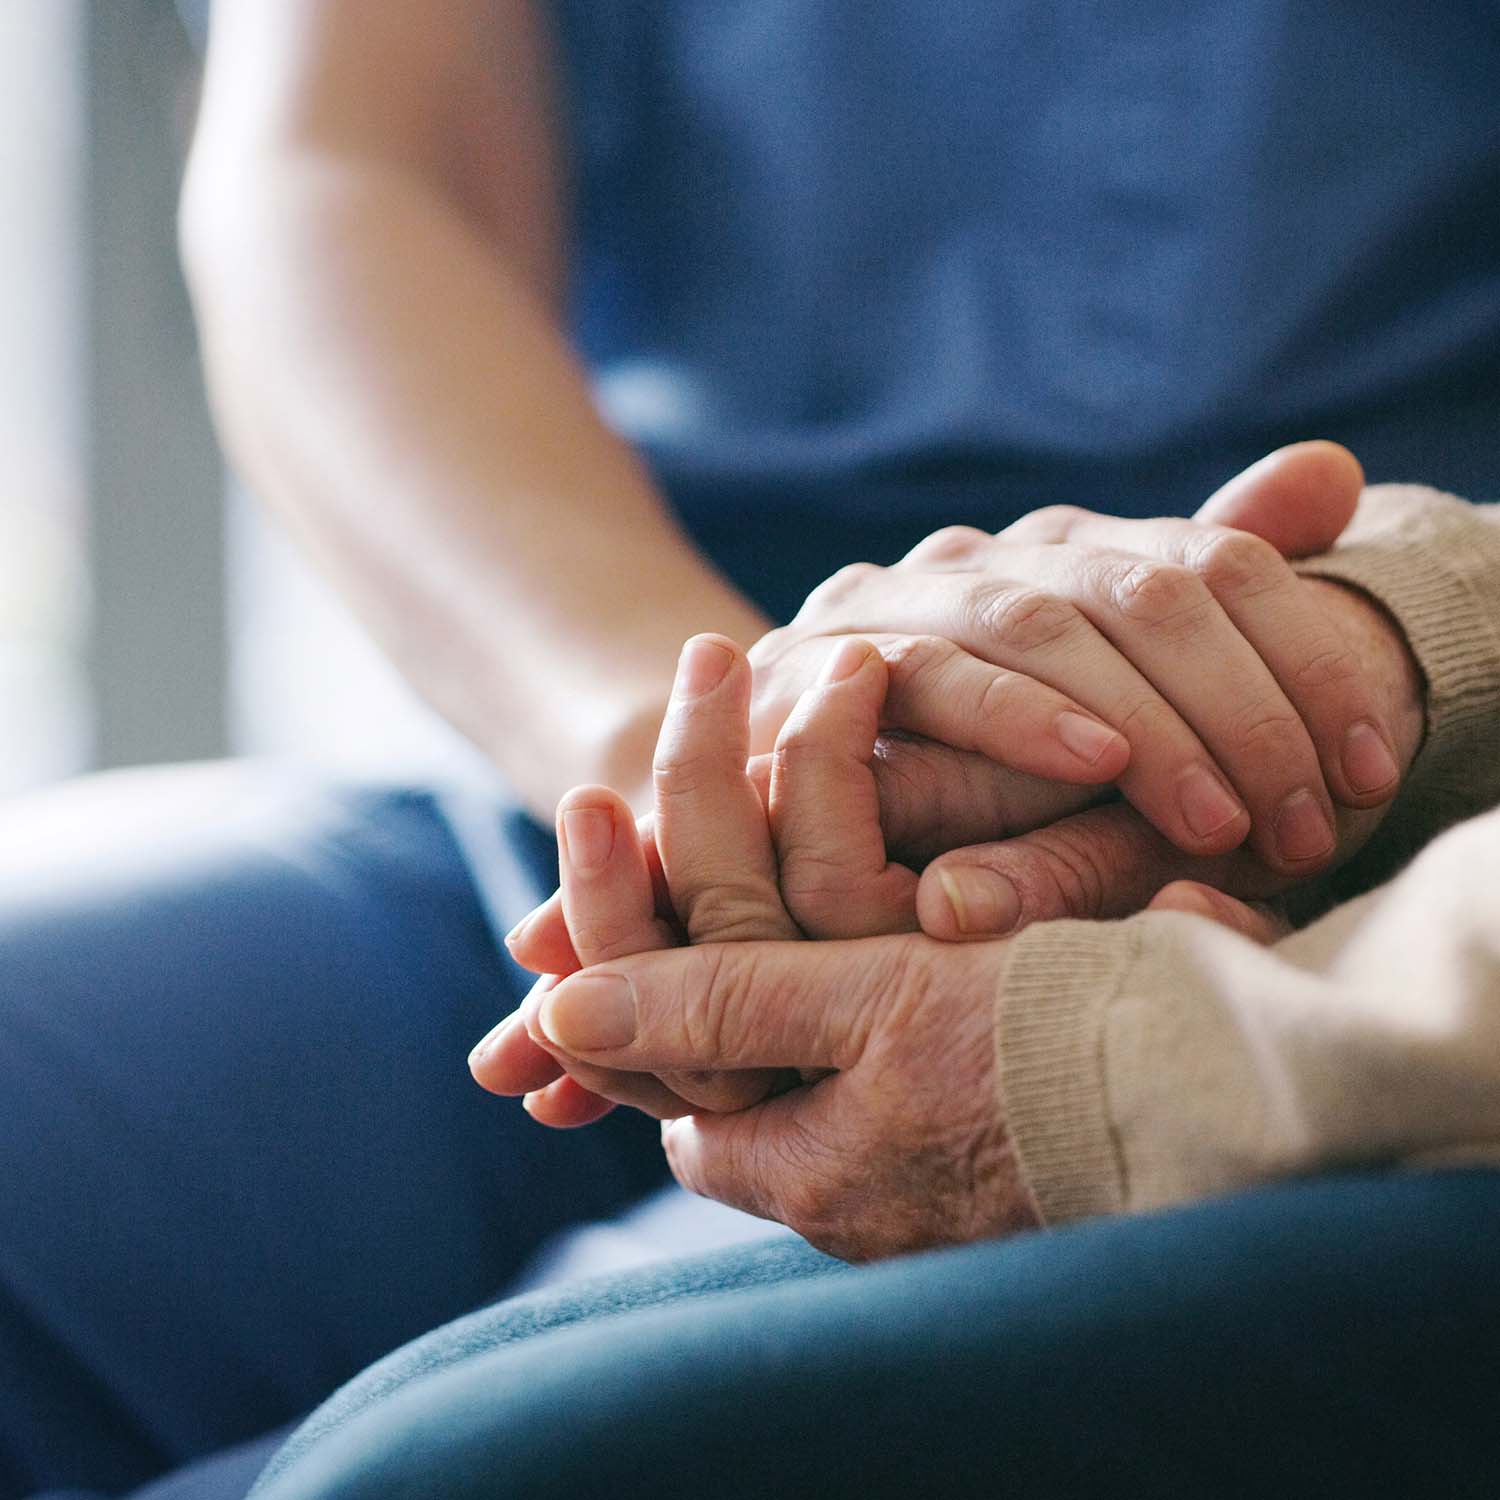 Caring healthcare worker holds hands with a patient